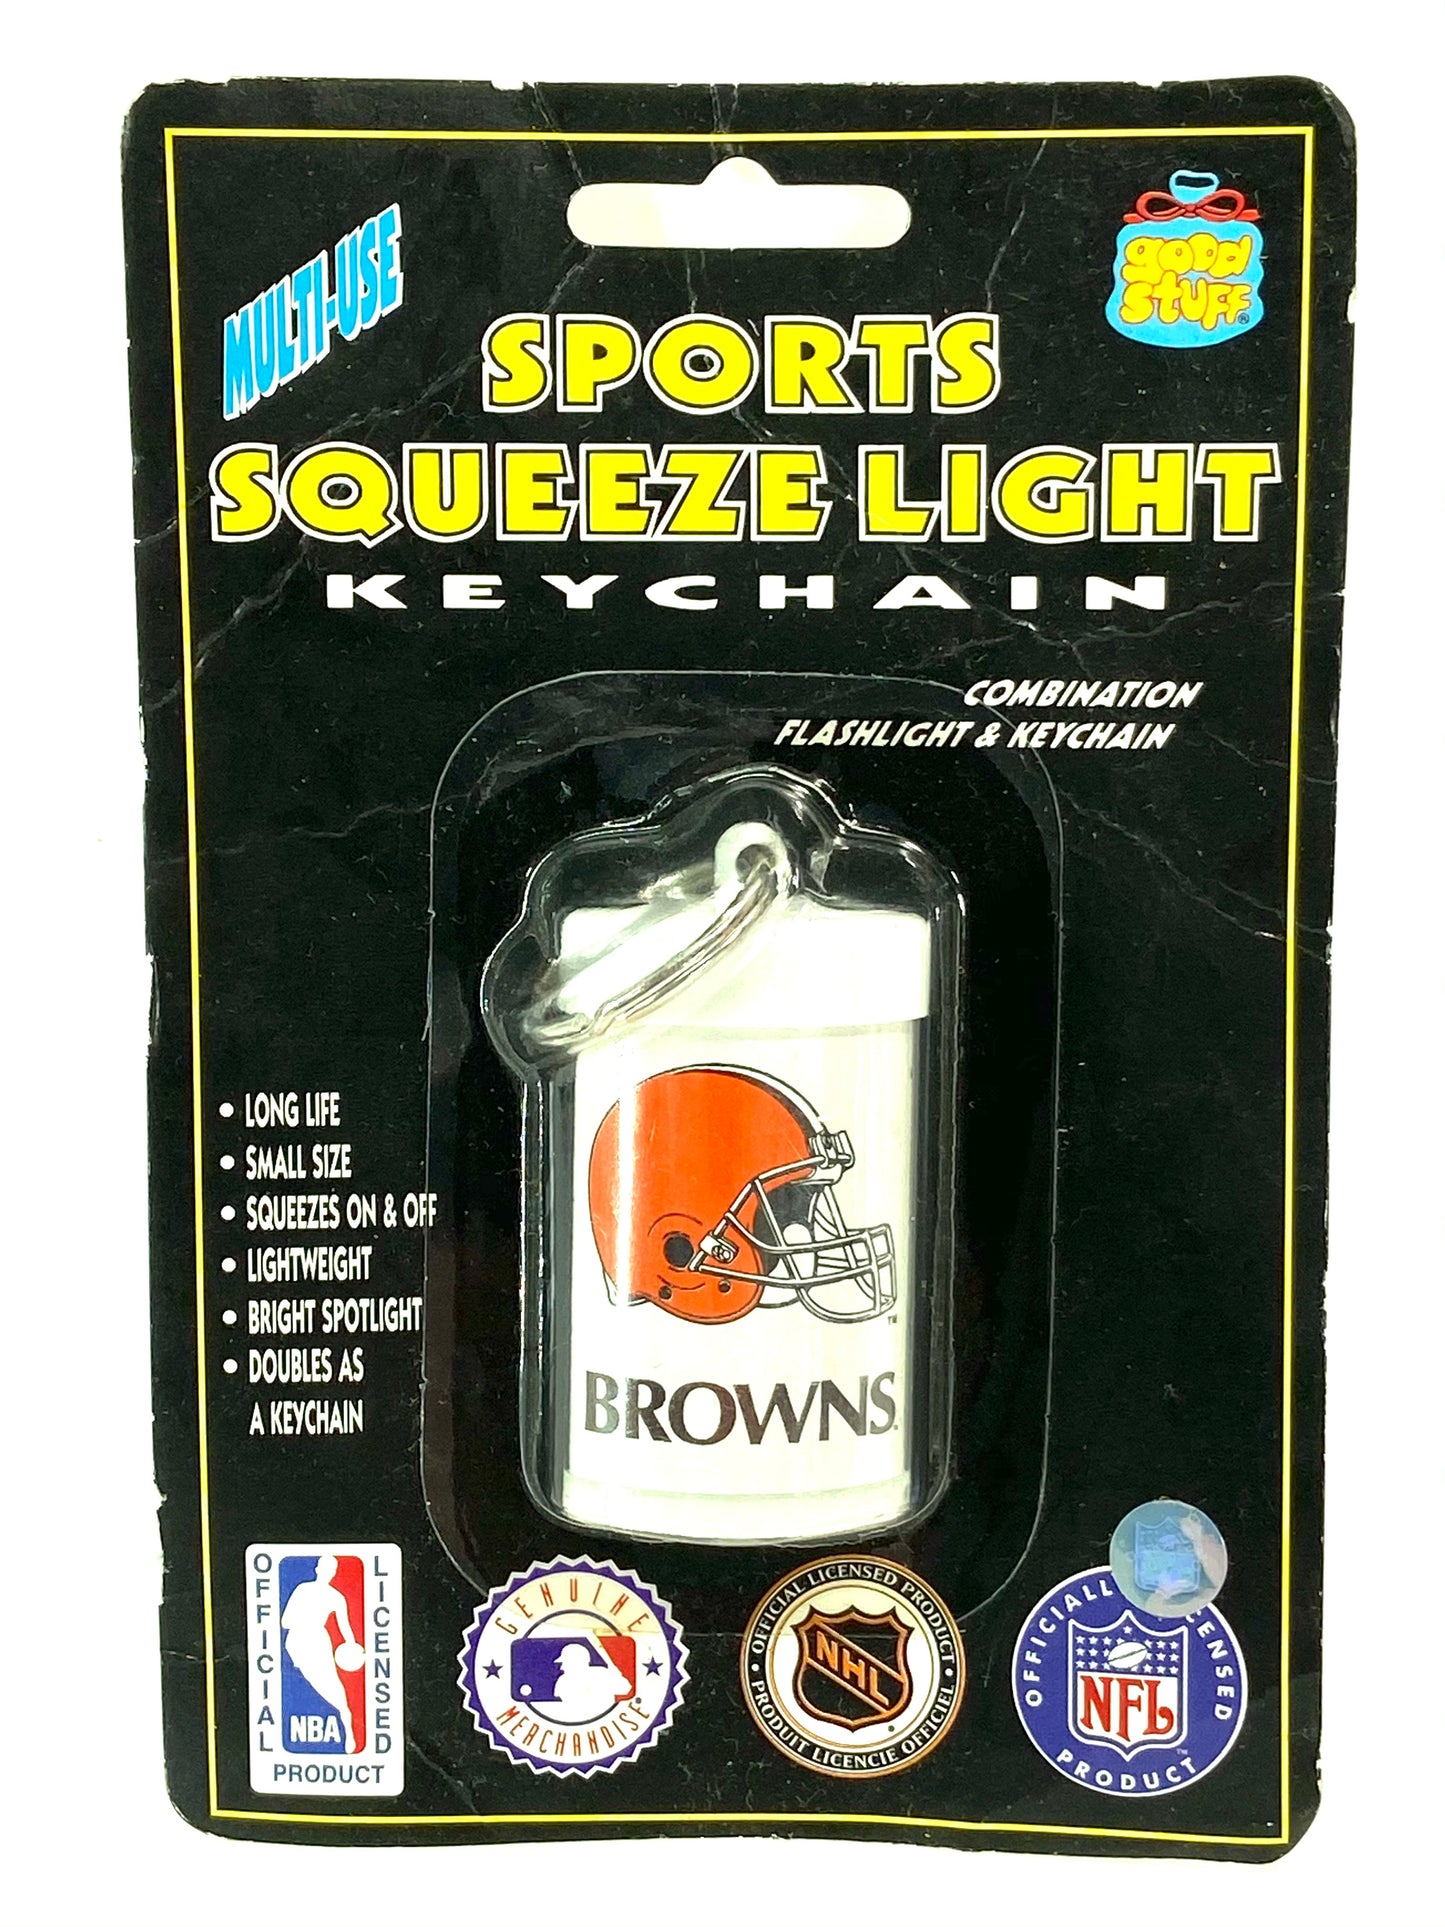 Cleveland Browns Vintage NFL Keychain by Good Stuff Corp.